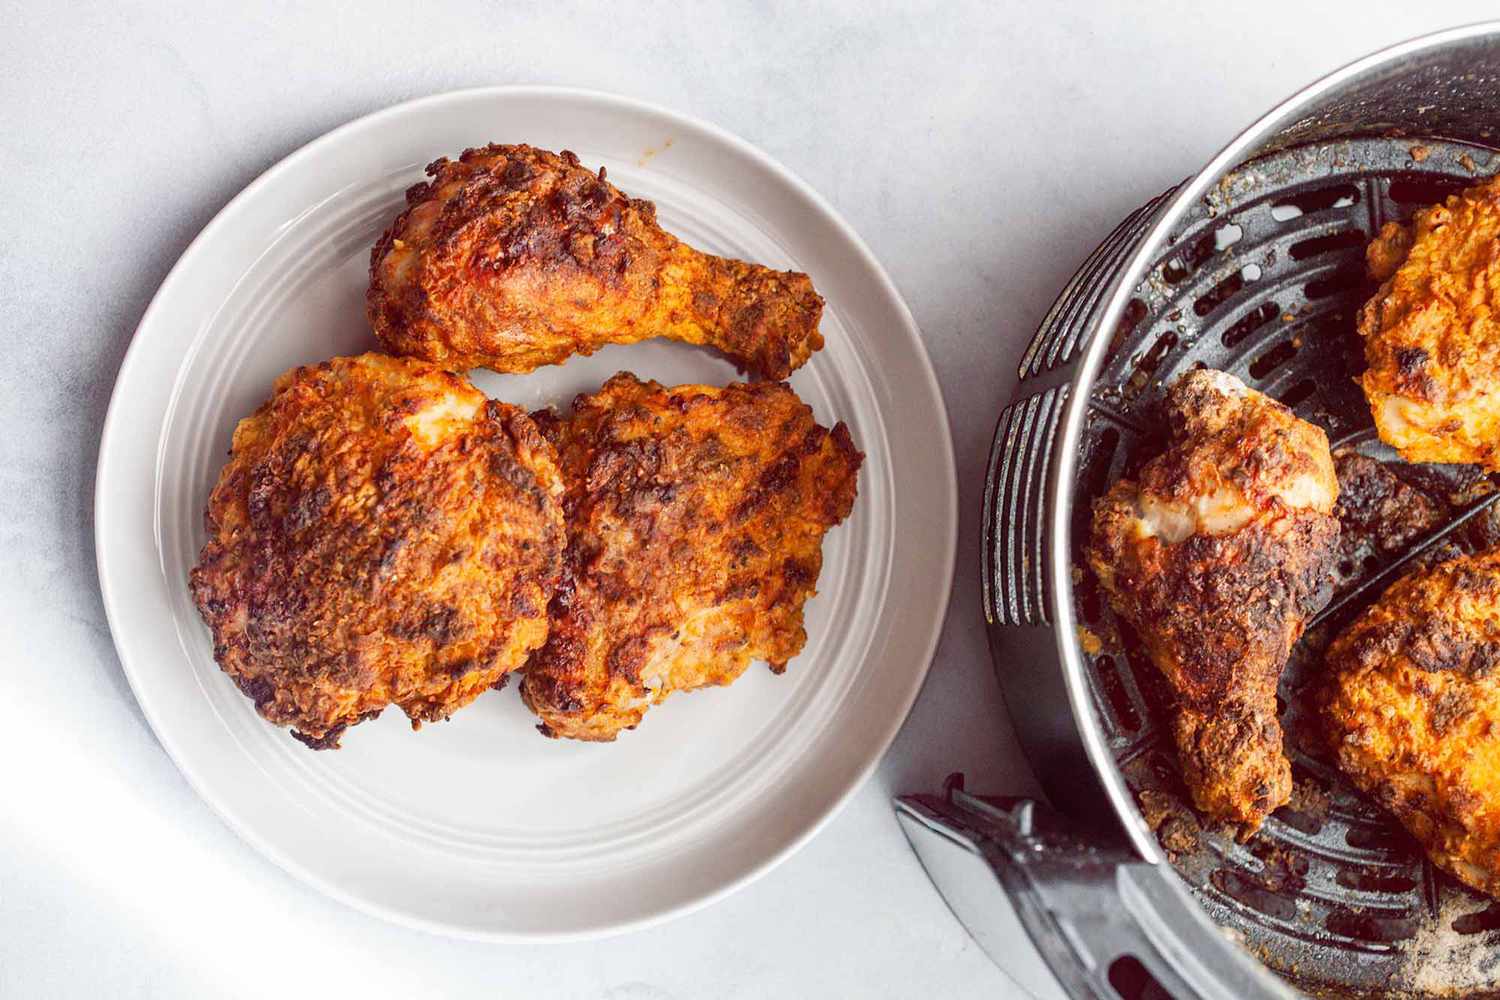 How To Make Chicken In An Air Fryer